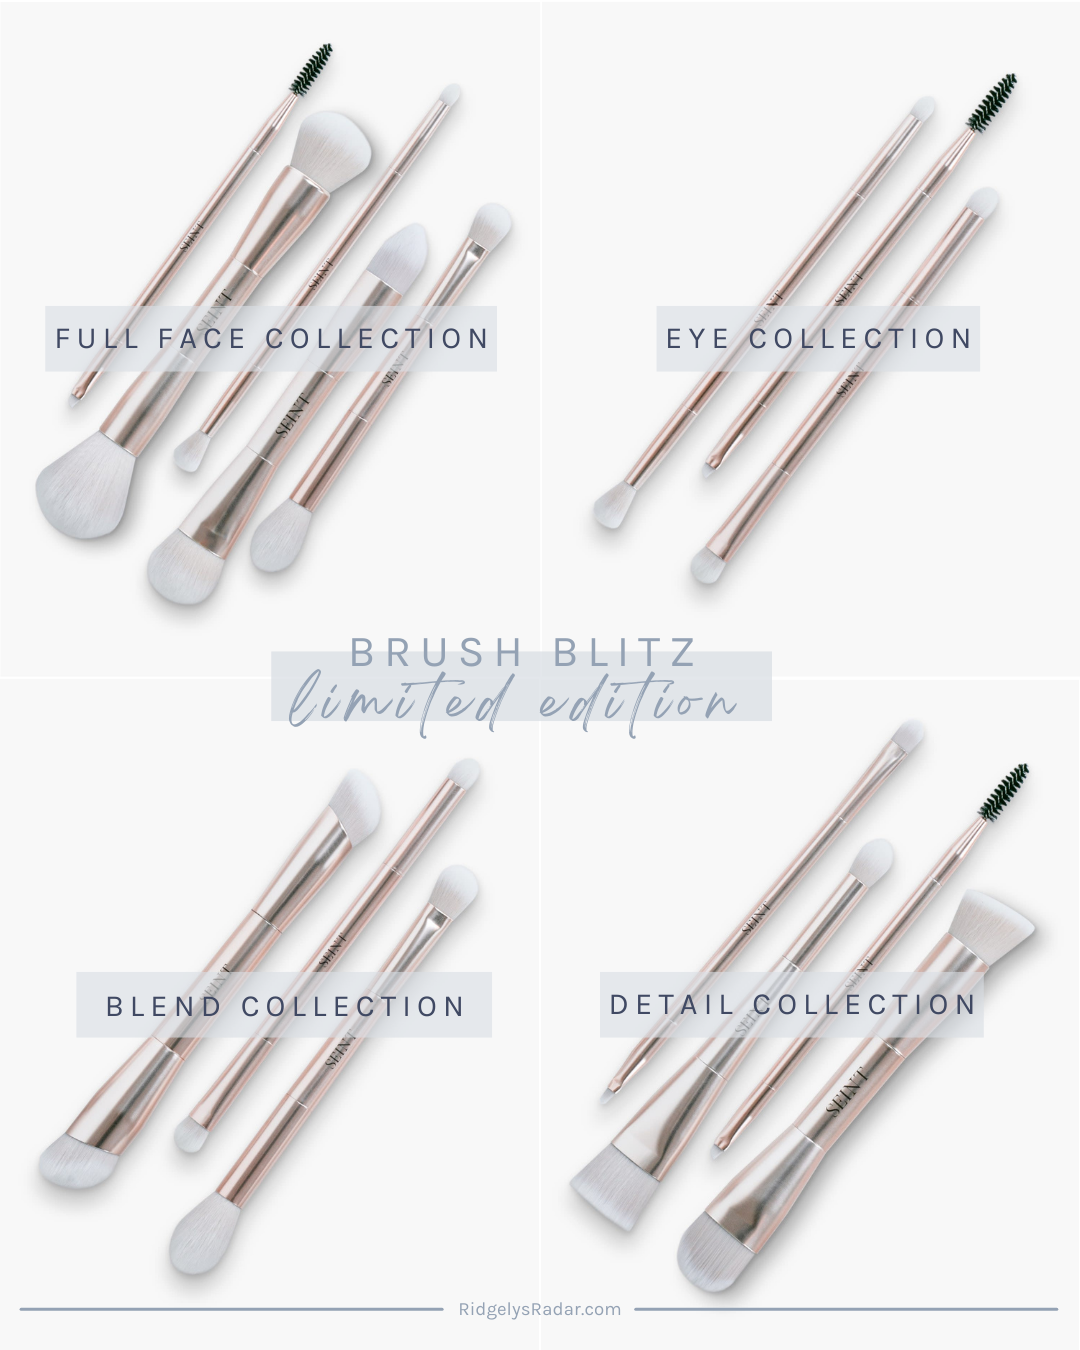 Brush Blitz is on now! Featuring four sets of the best makeup brushes for applying your makeup flawlessly for a beautiful radiant look.